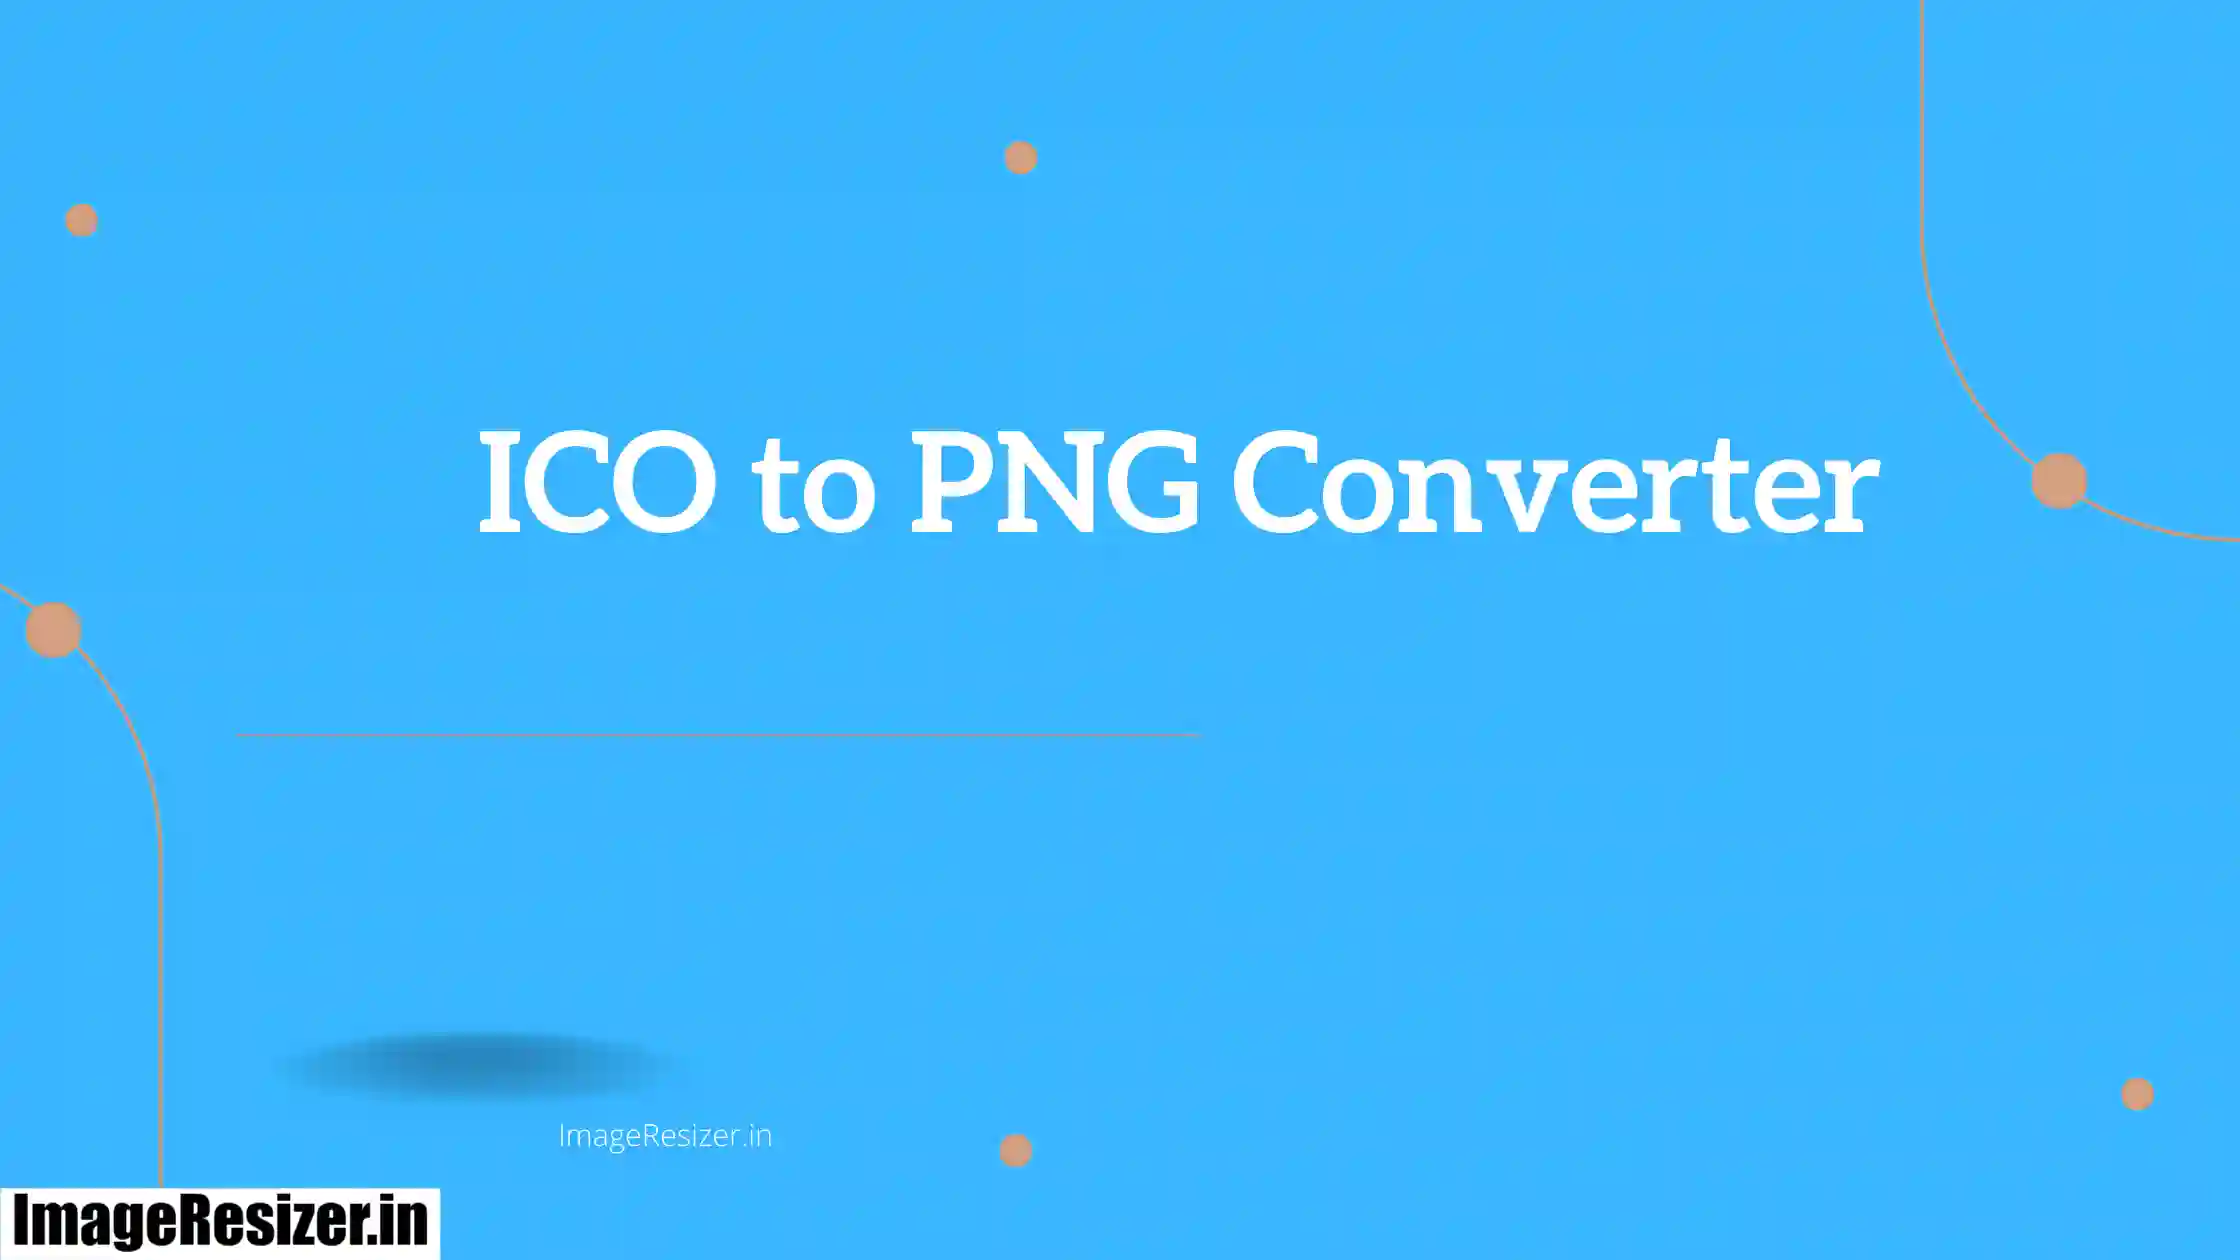 ico to png converter